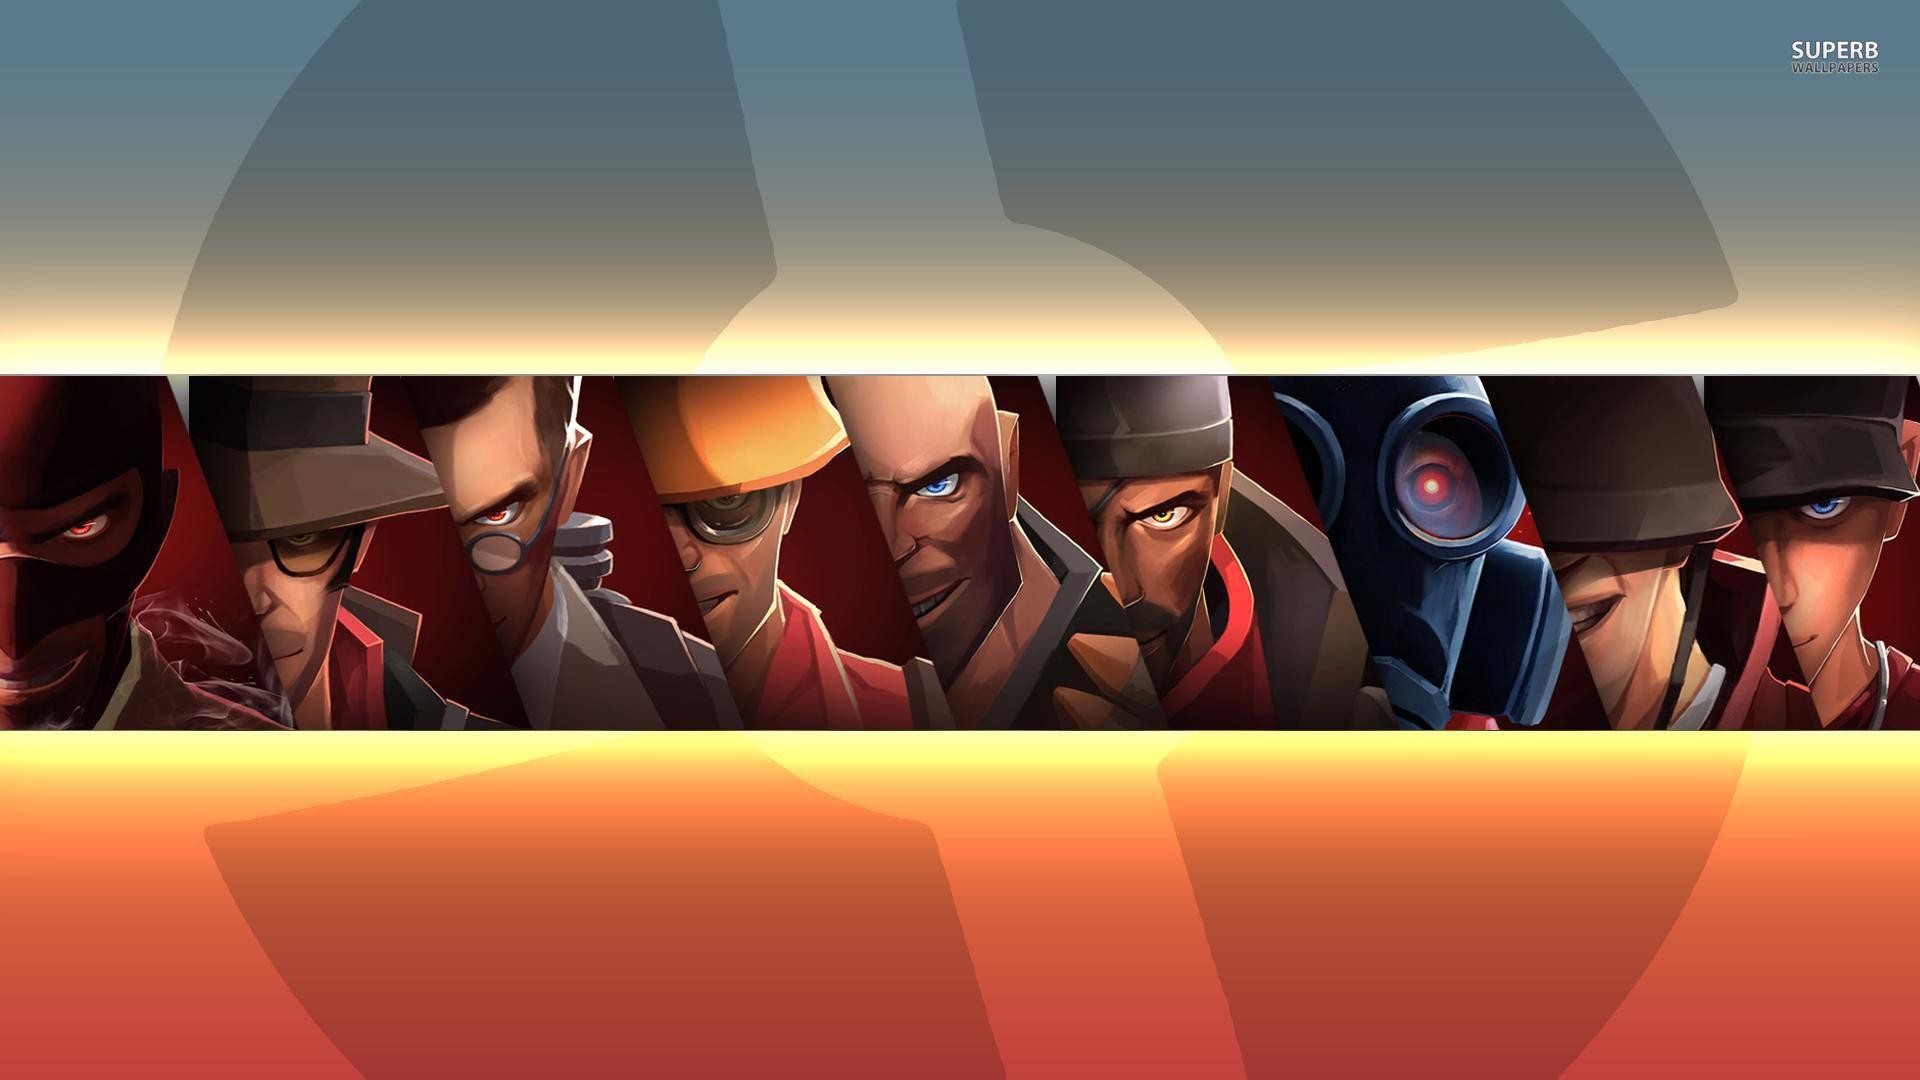 1920x1080 Team Fortress 2 wallpaper - Game wallpapers - #